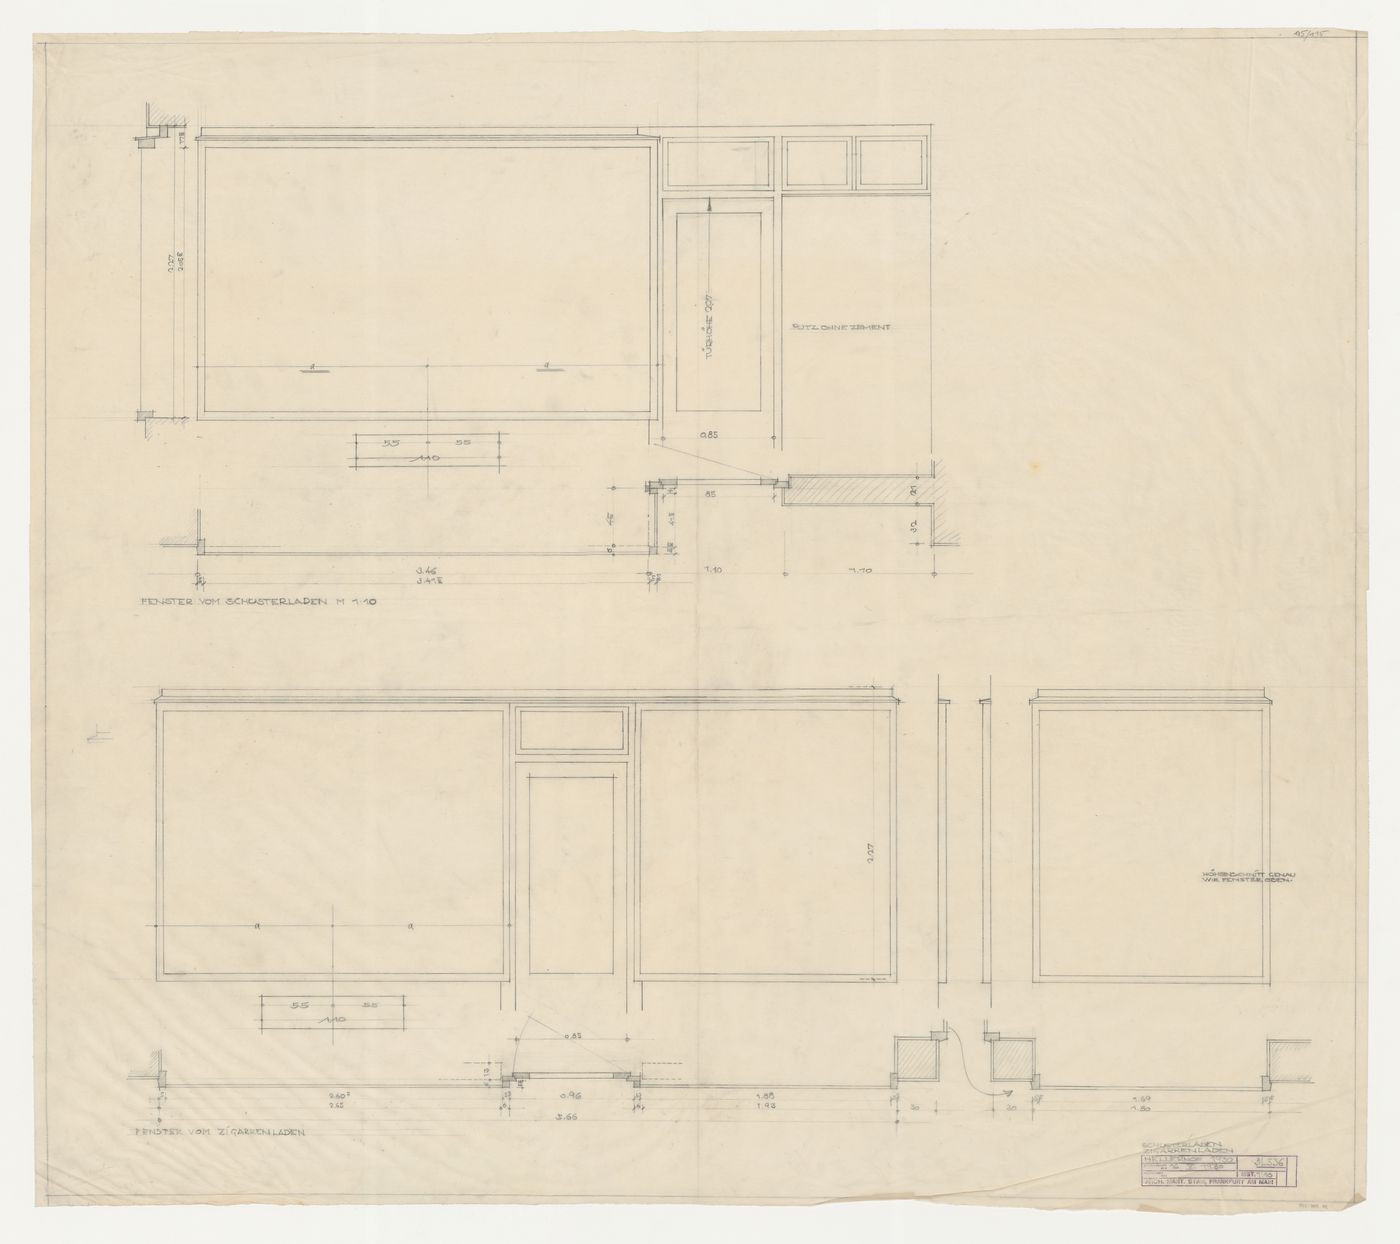 Elevations and plans for a shoe store and a cigar store, Hellerhof Housing Estate, Frankfurt am Main, Germany